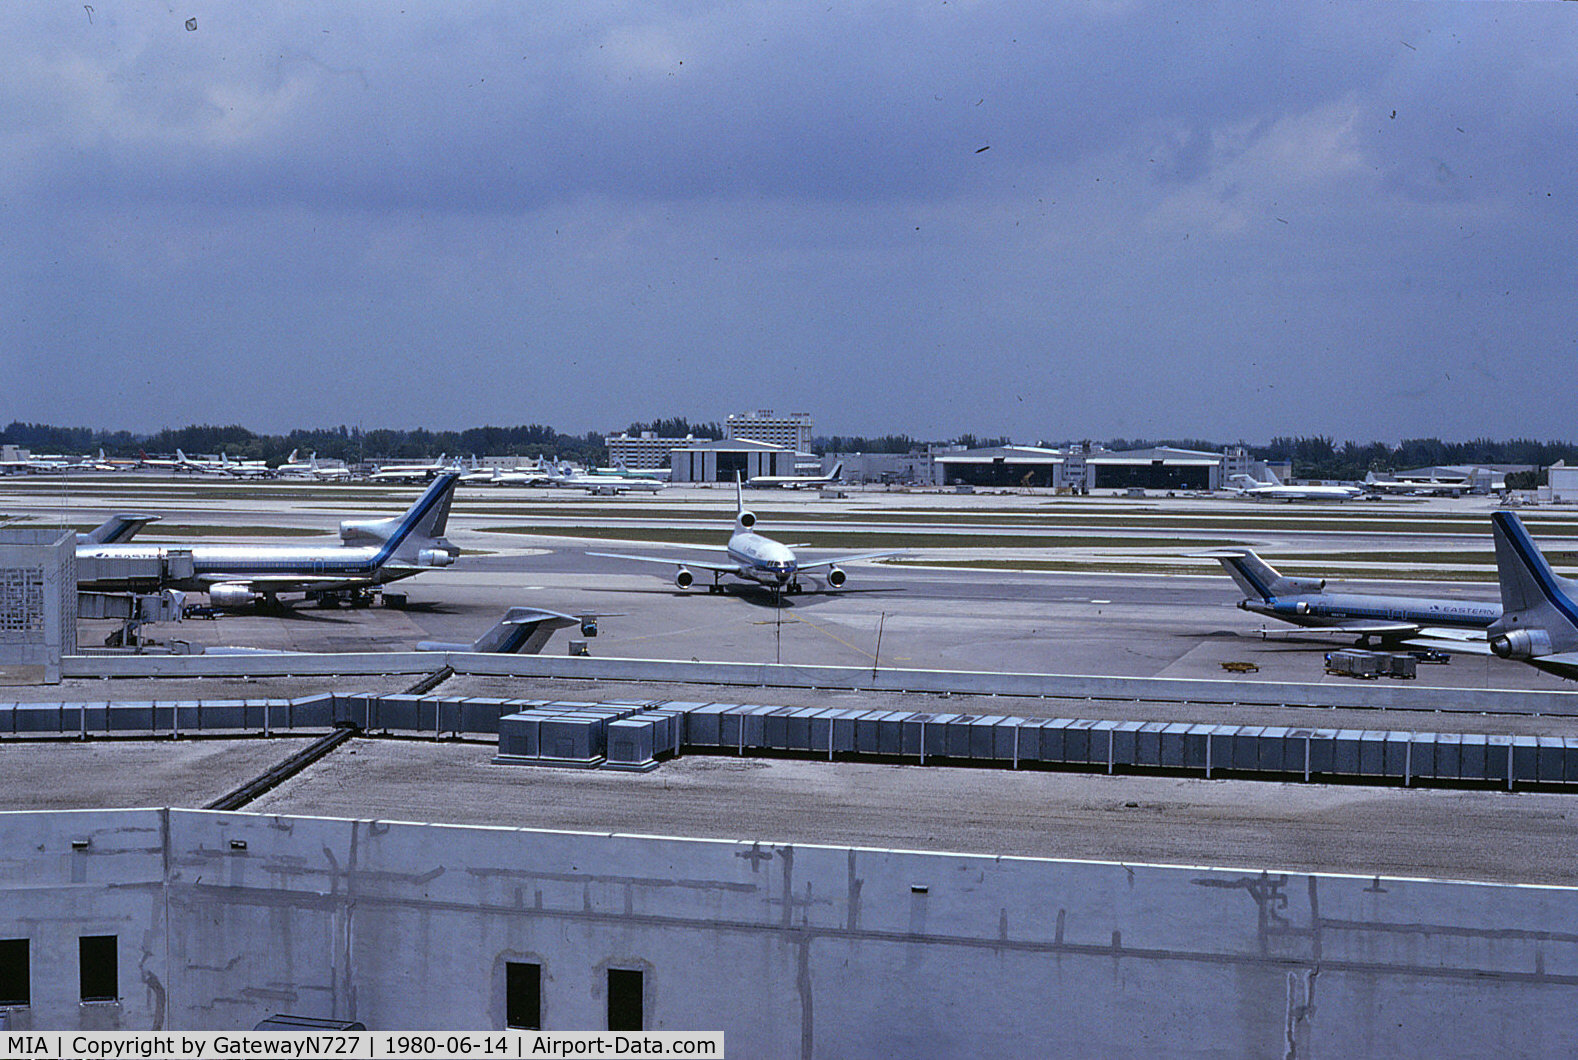 Miami International Airport (MIA) - Looking at the northside of the airport from the parking garage.